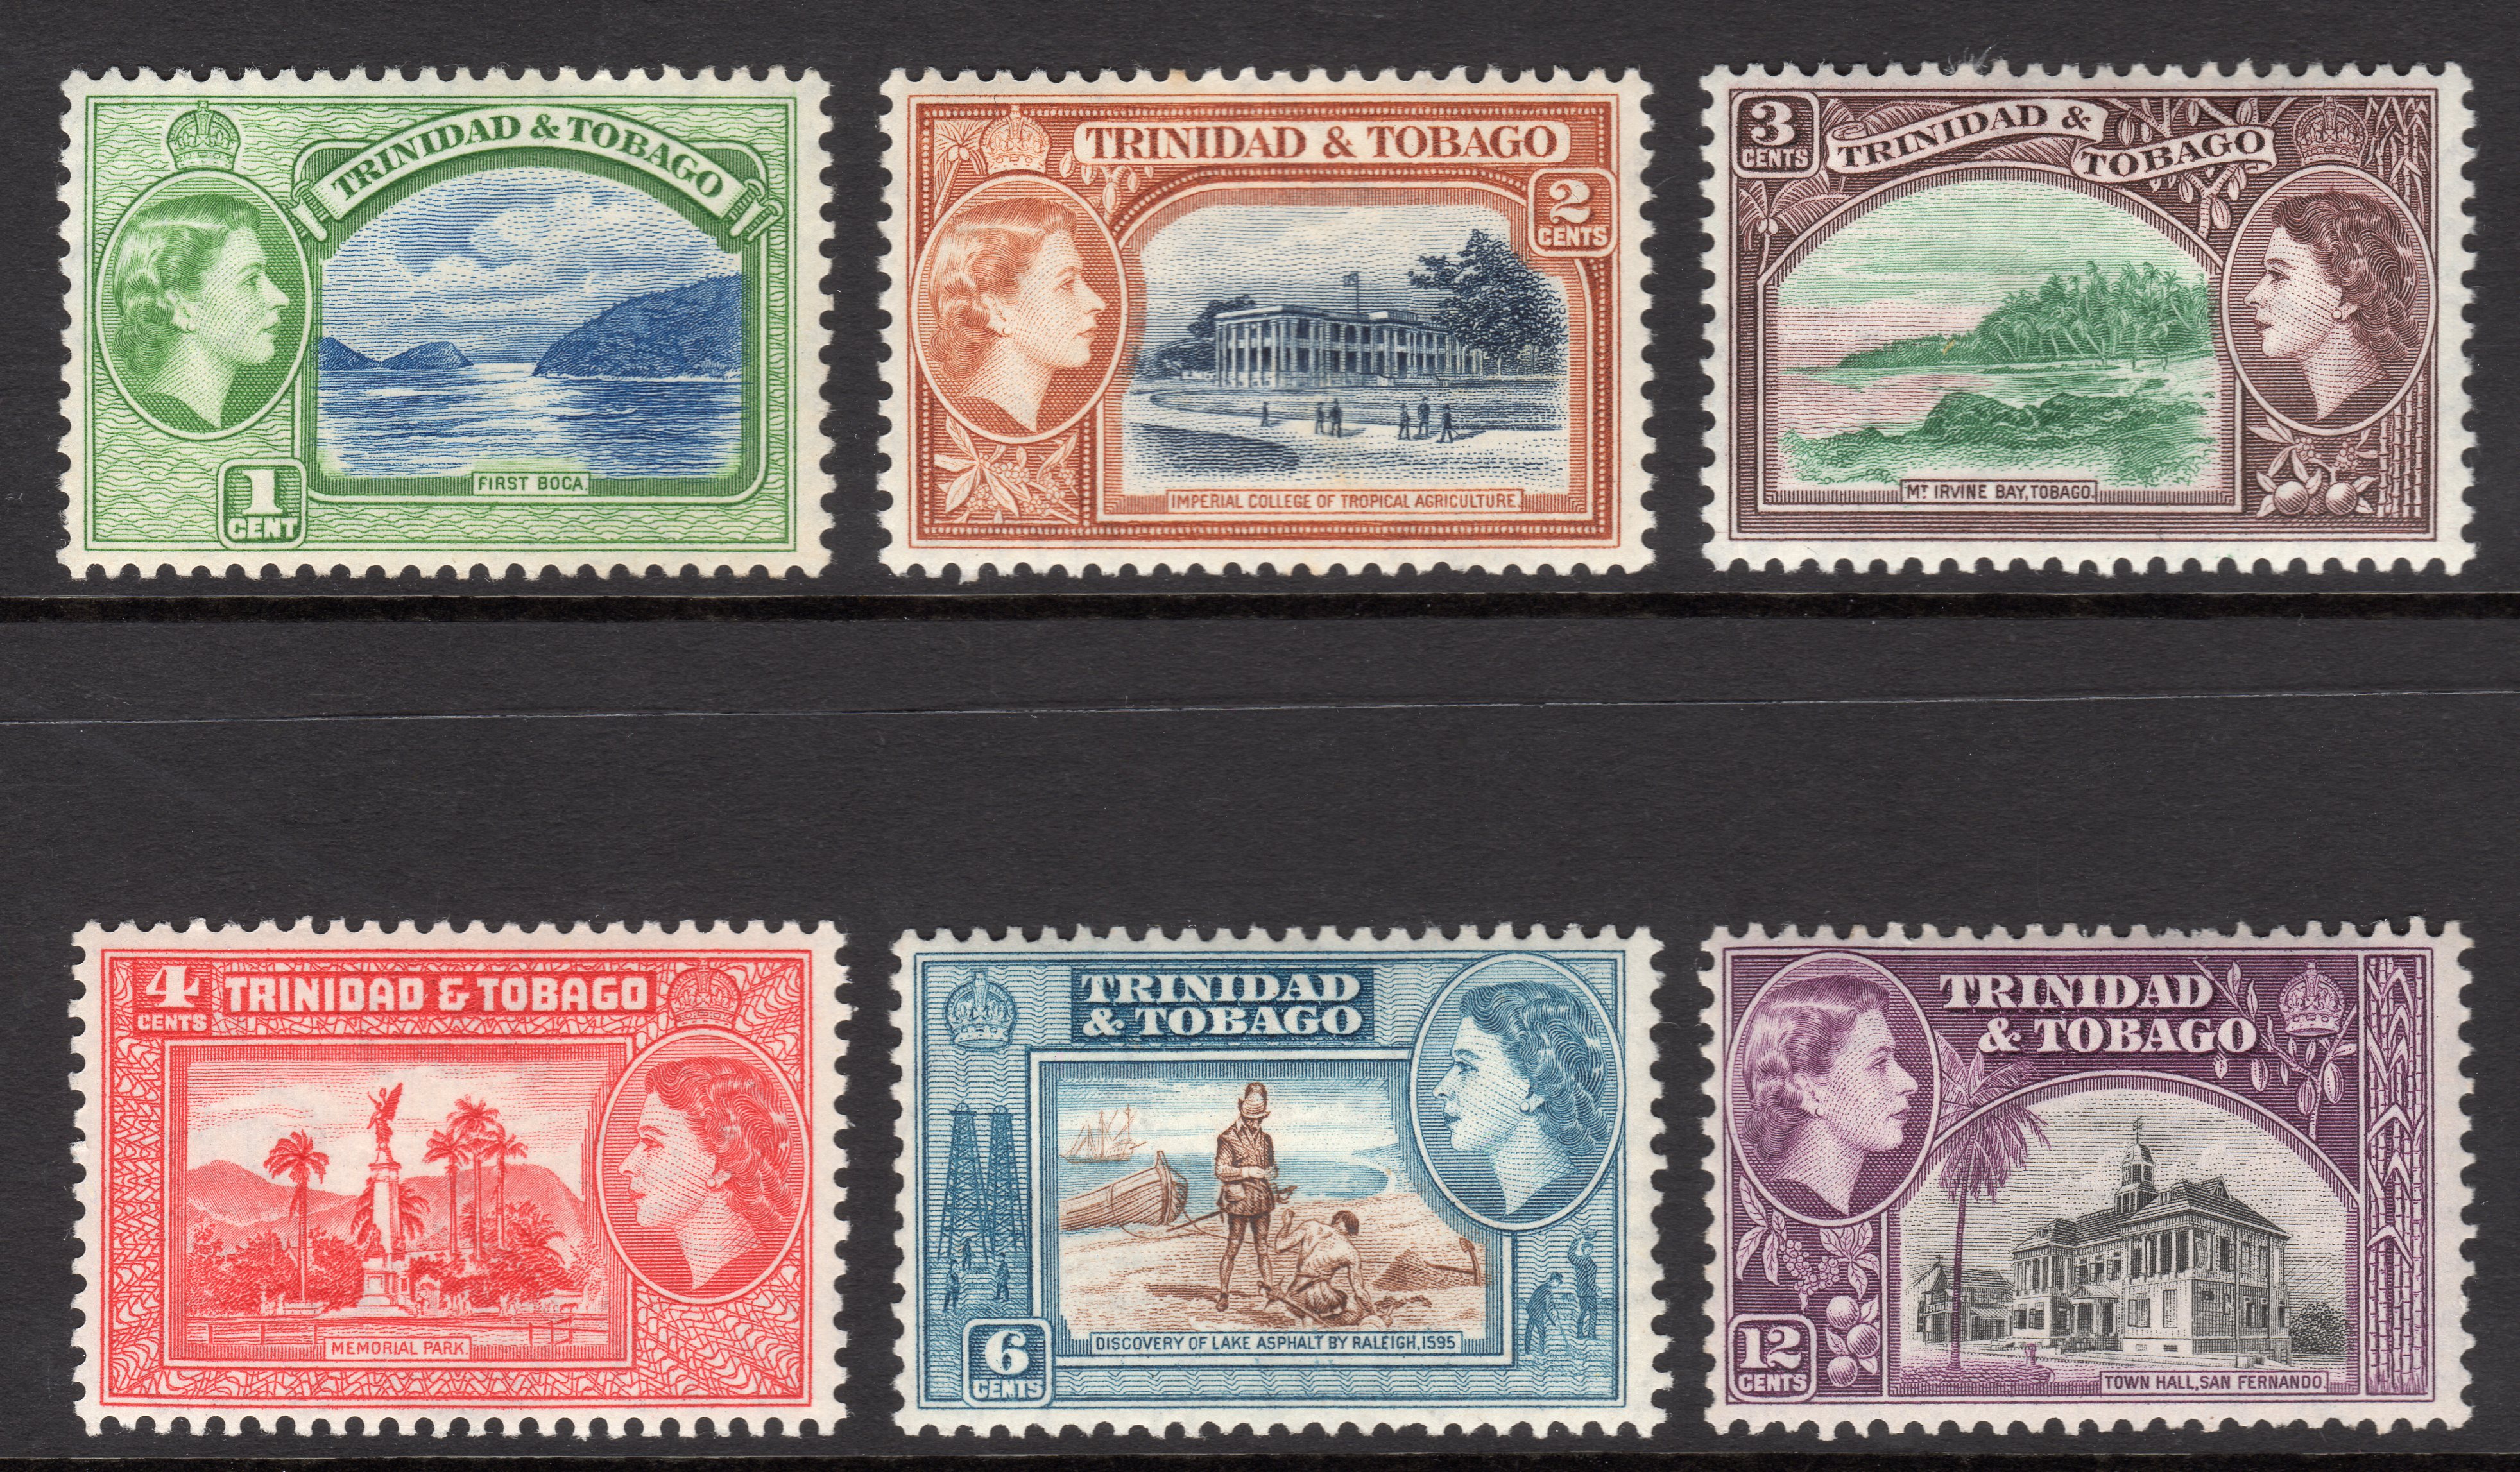 1953 stamps of Trinidad and Tobago